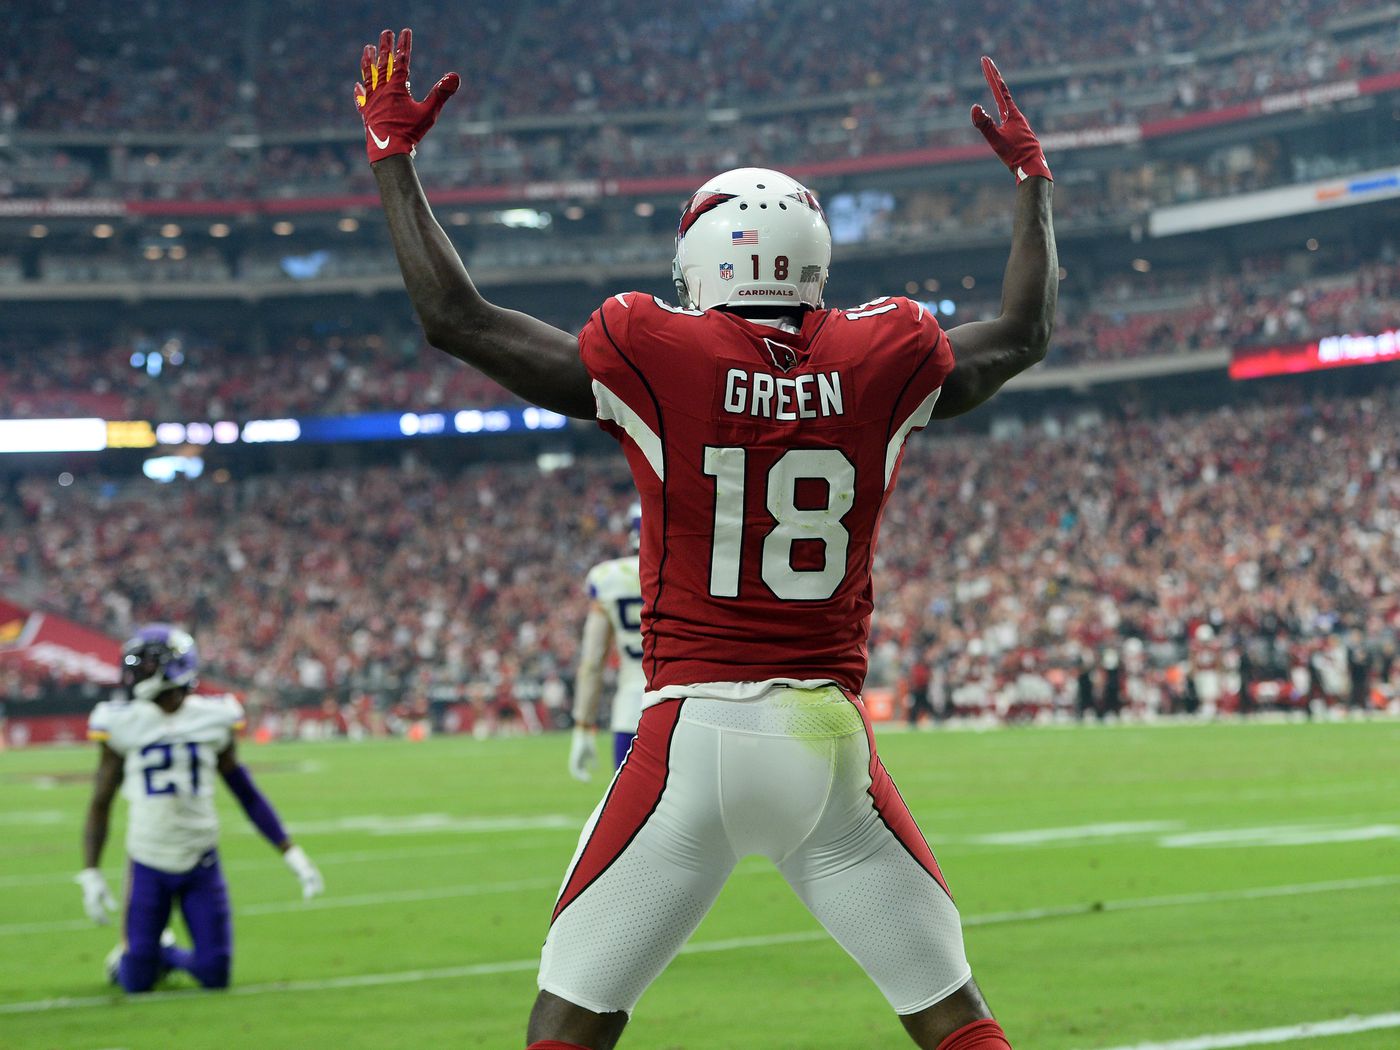 AJ Green fantasy advice: Start or sit the Cardinals WR in Week 1